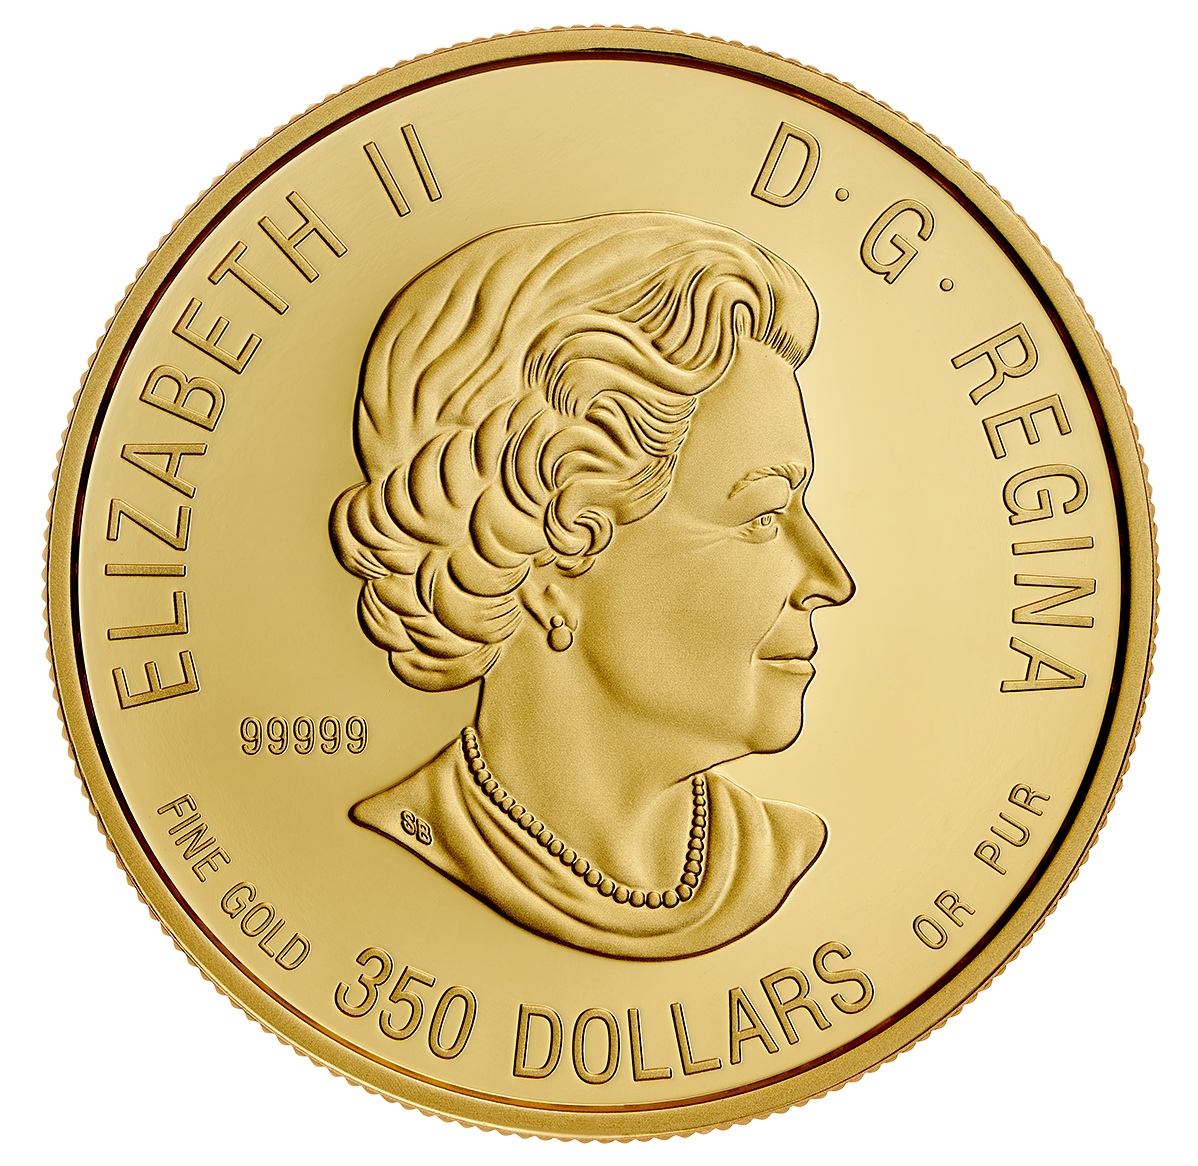 1.125 oz Pure Gold Coin - Canadian Wildlife Portraits: The Cougar - Mintage: 400 (2019)